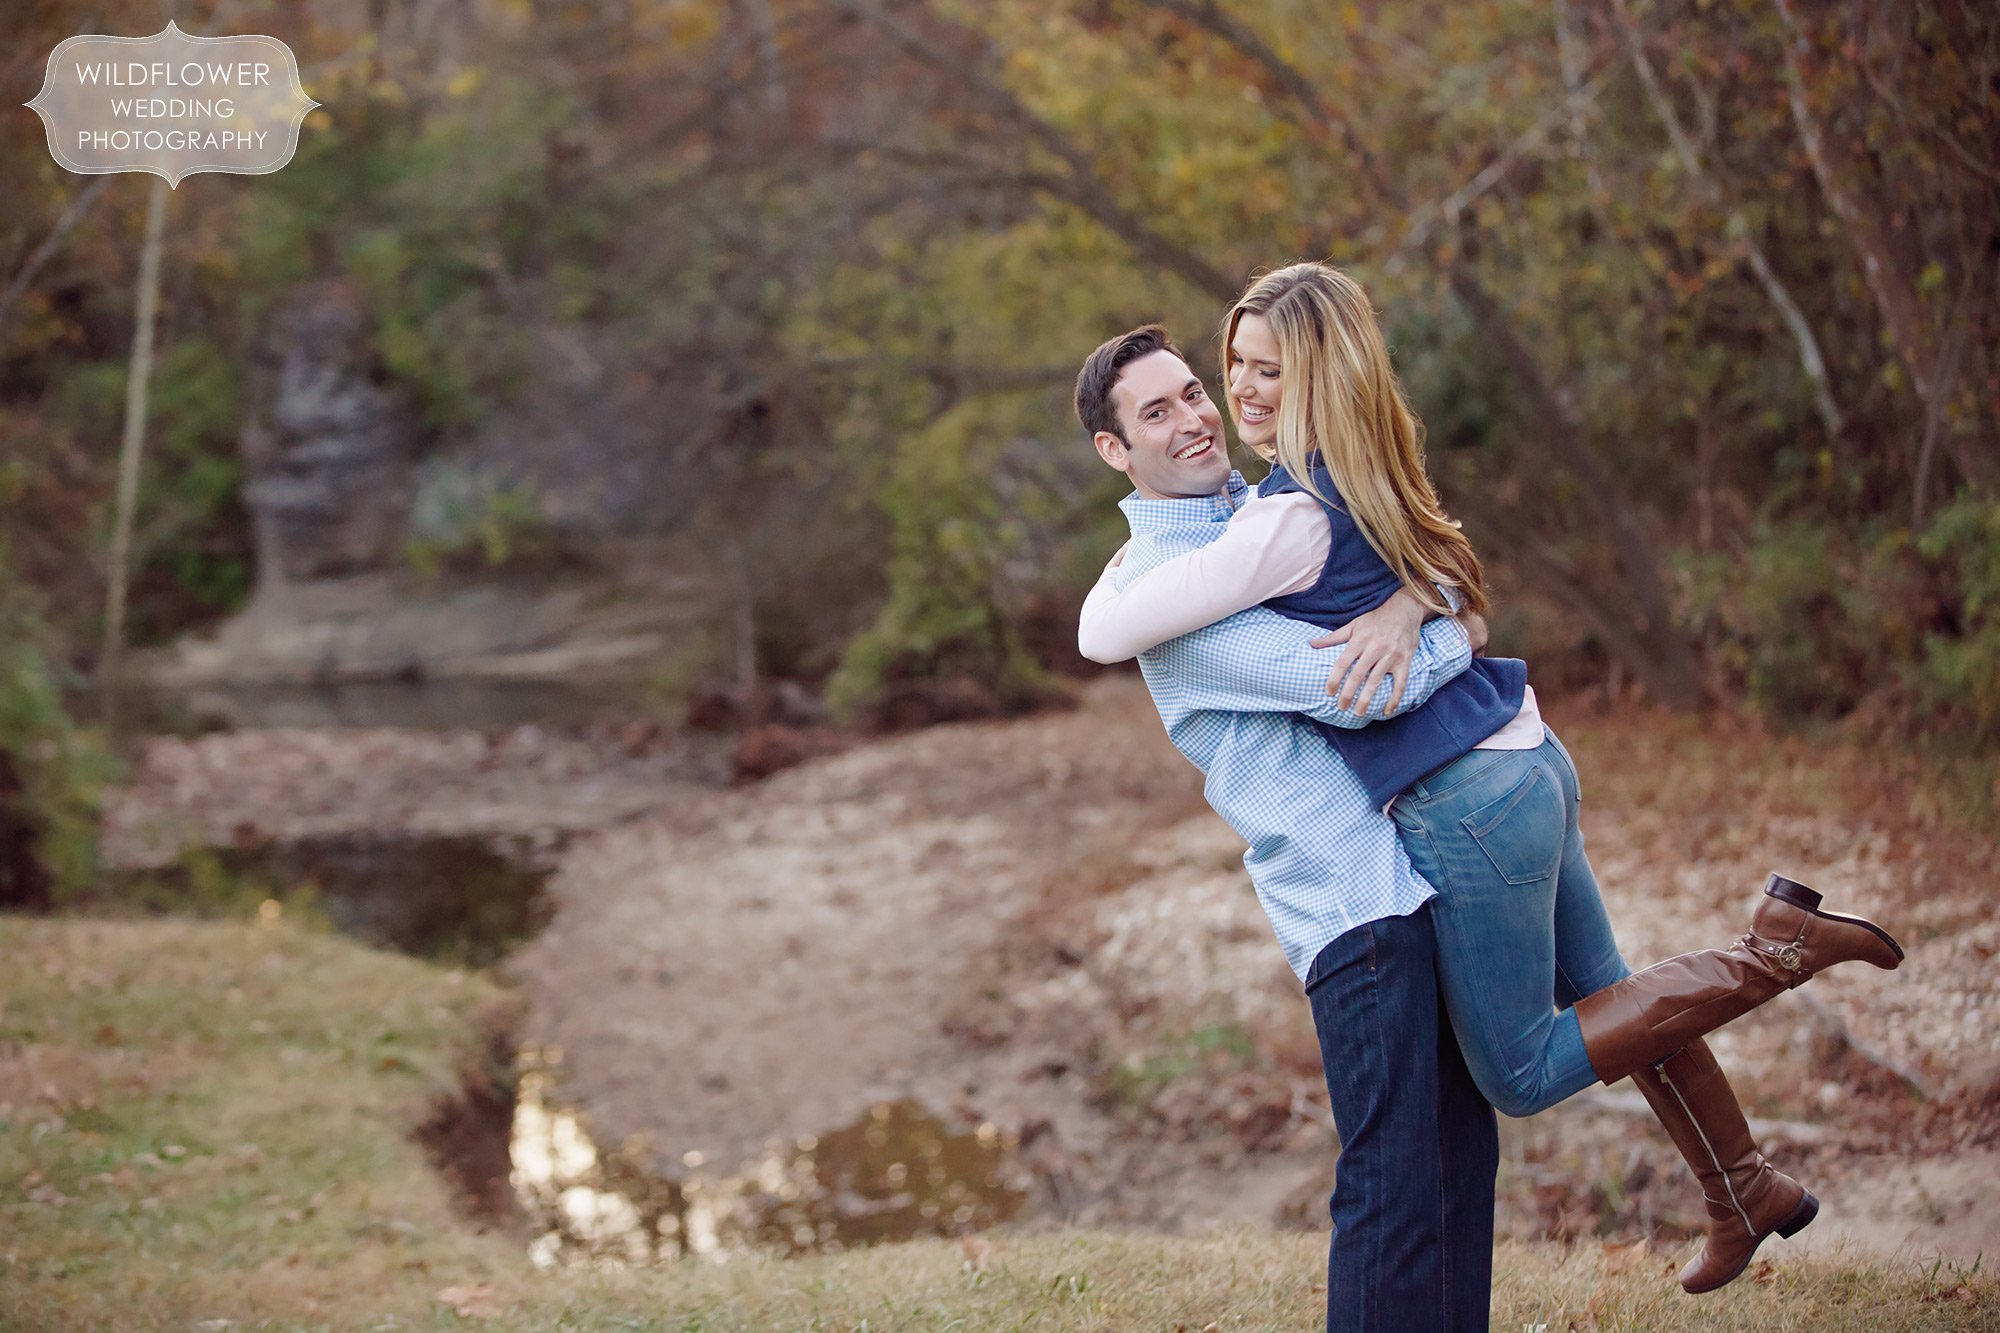 Fun engagement photo of the guy picking up the girl laughing at Grindstone Park in Columbia, MO.